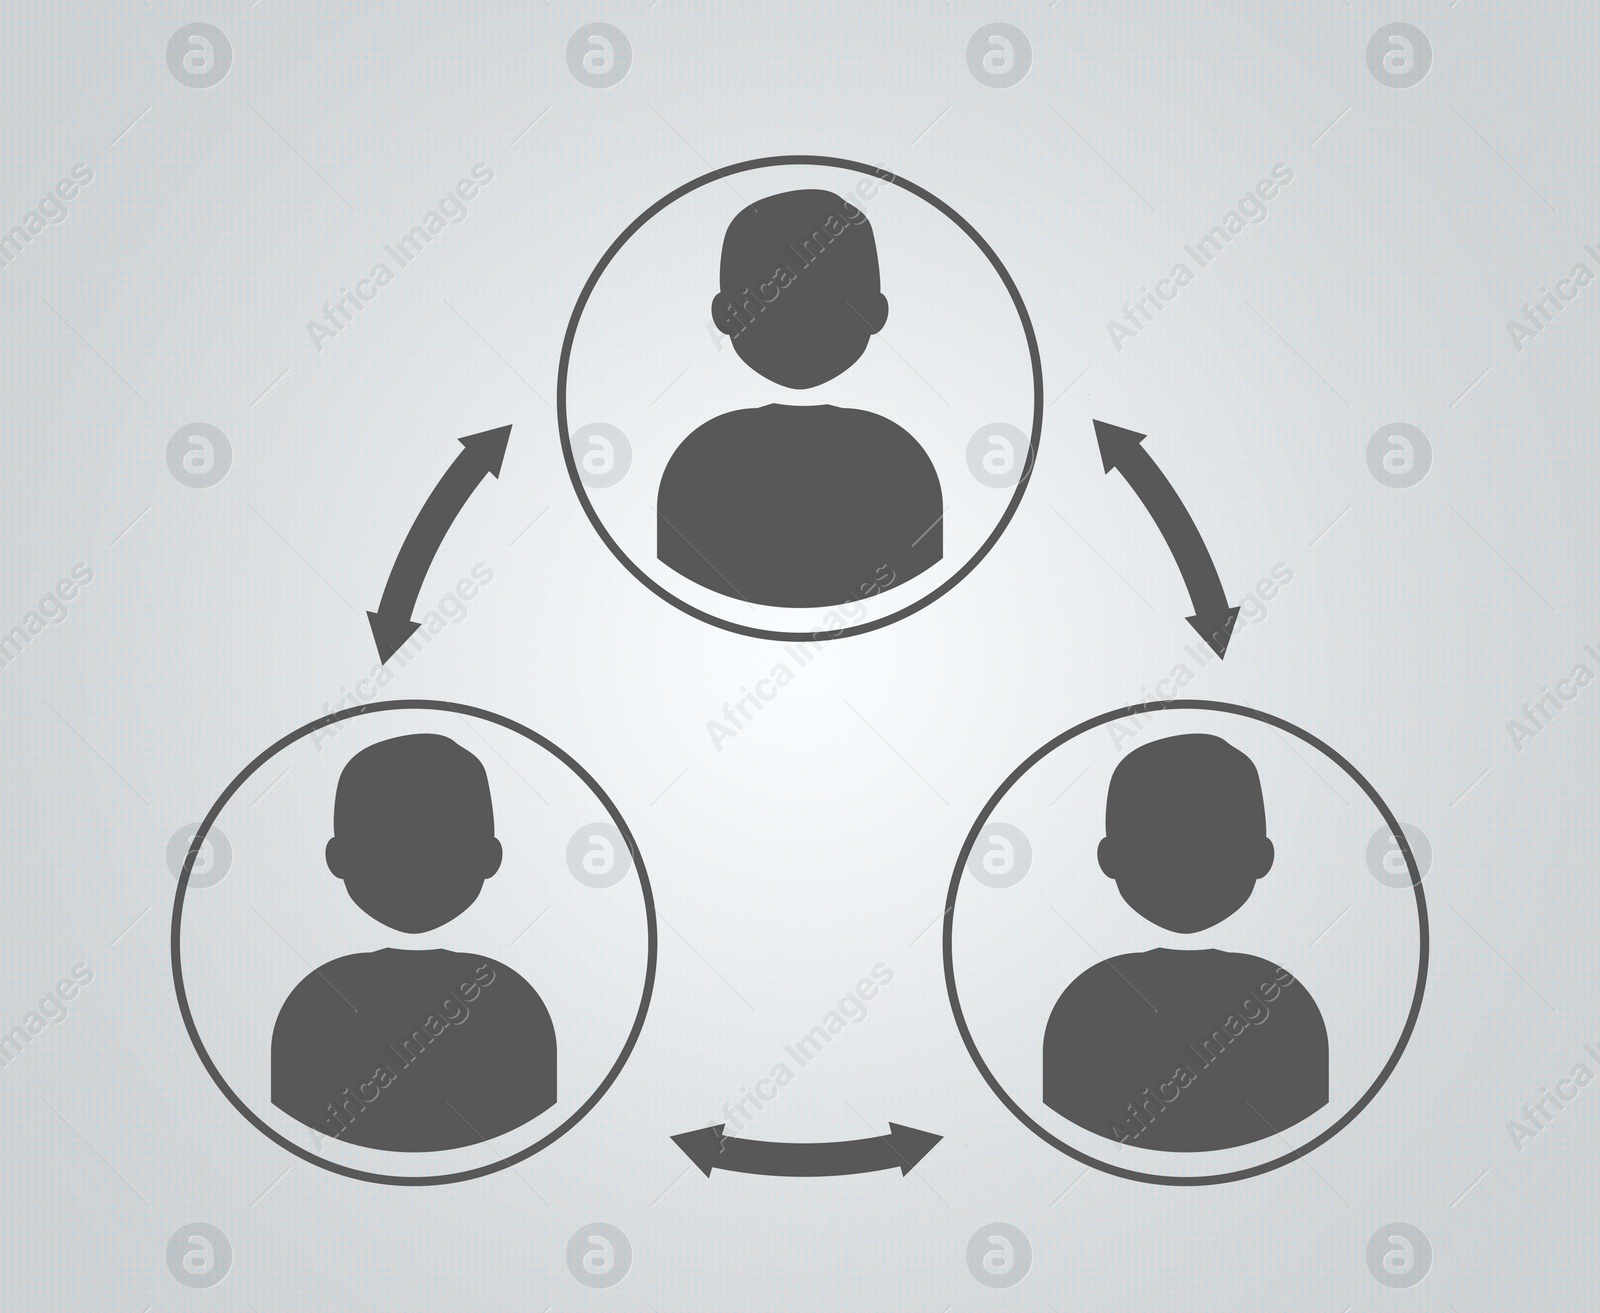 Illustration of Human icons connected with double arrows on grey background, illustration. Multi-user system